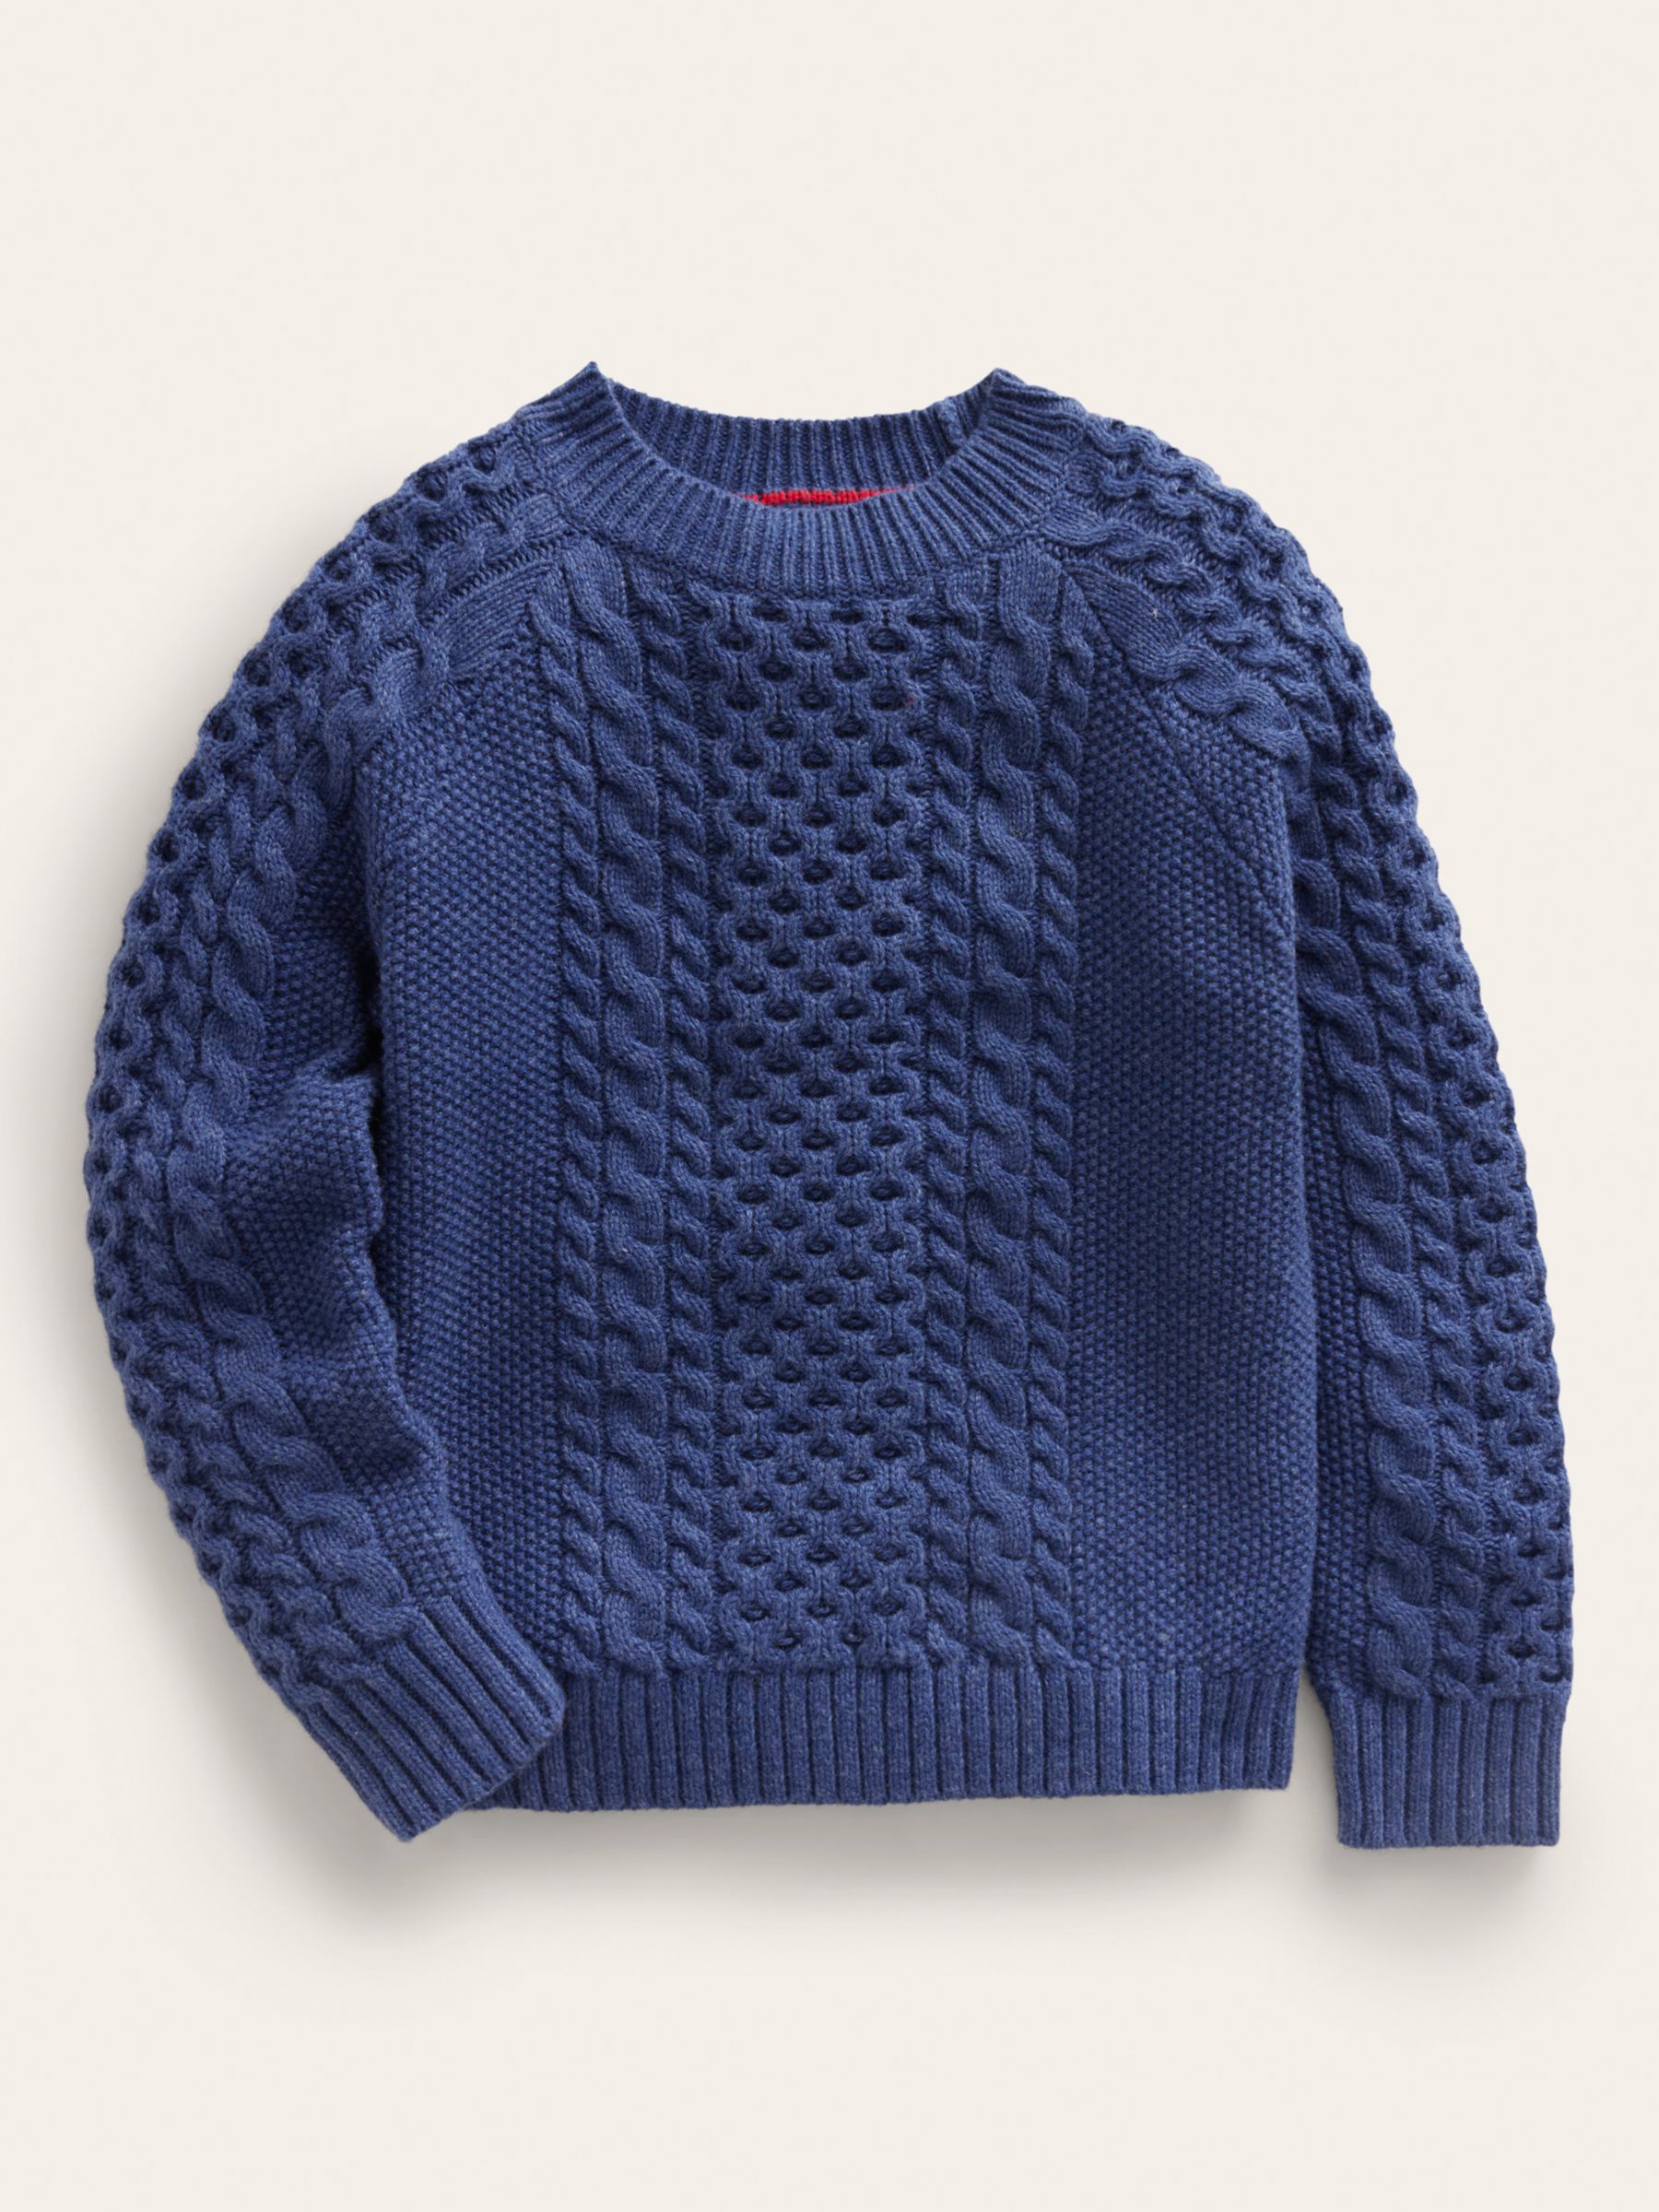 Mini Boden Kids' Heritage Cable Knit Jumper, College Navy, 6-7 years